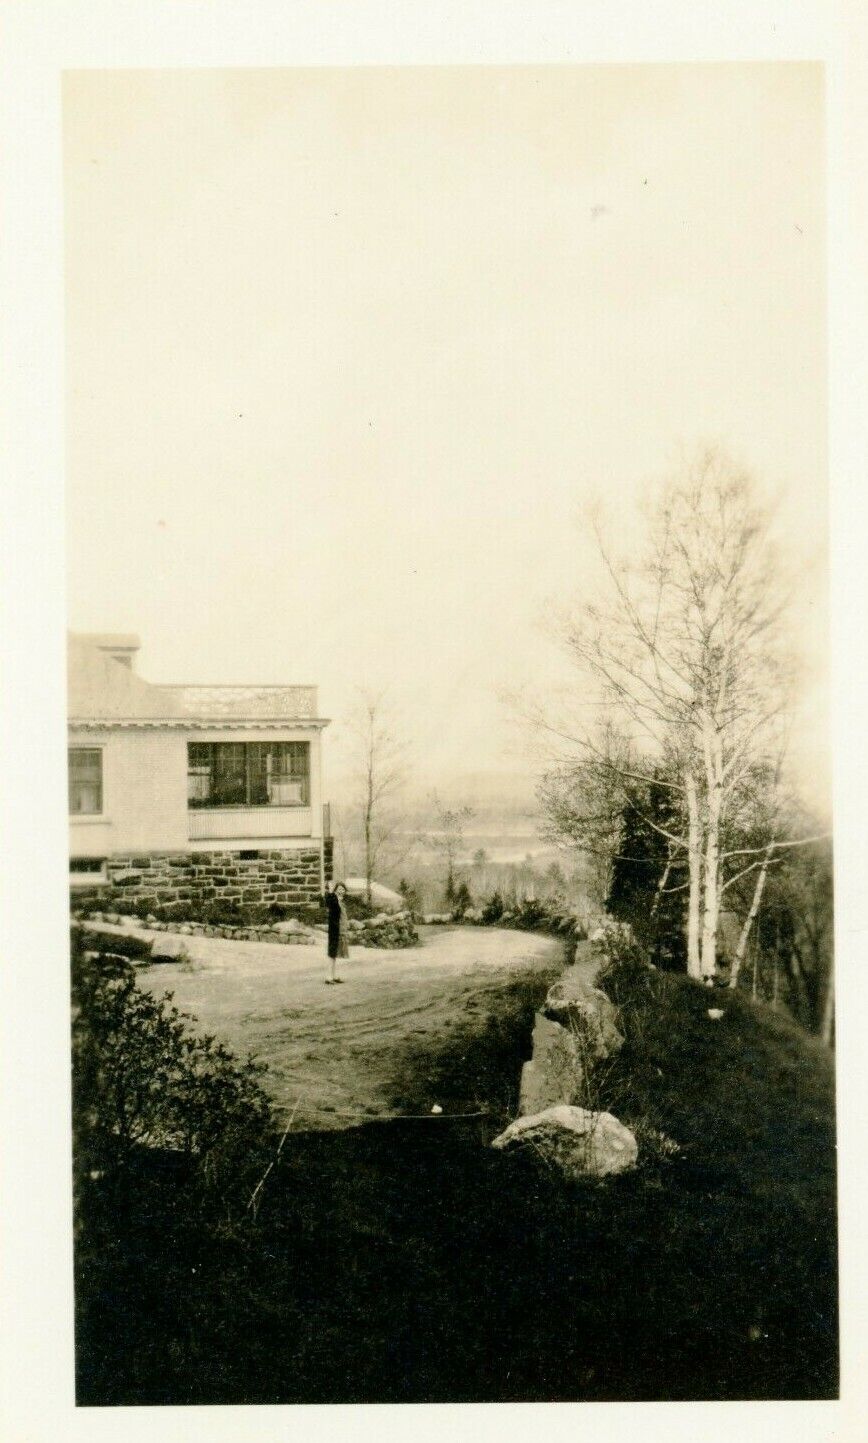 Woman at House Overlooking Cliff to Nowhere Creepy Odd Vintage Old Photo 